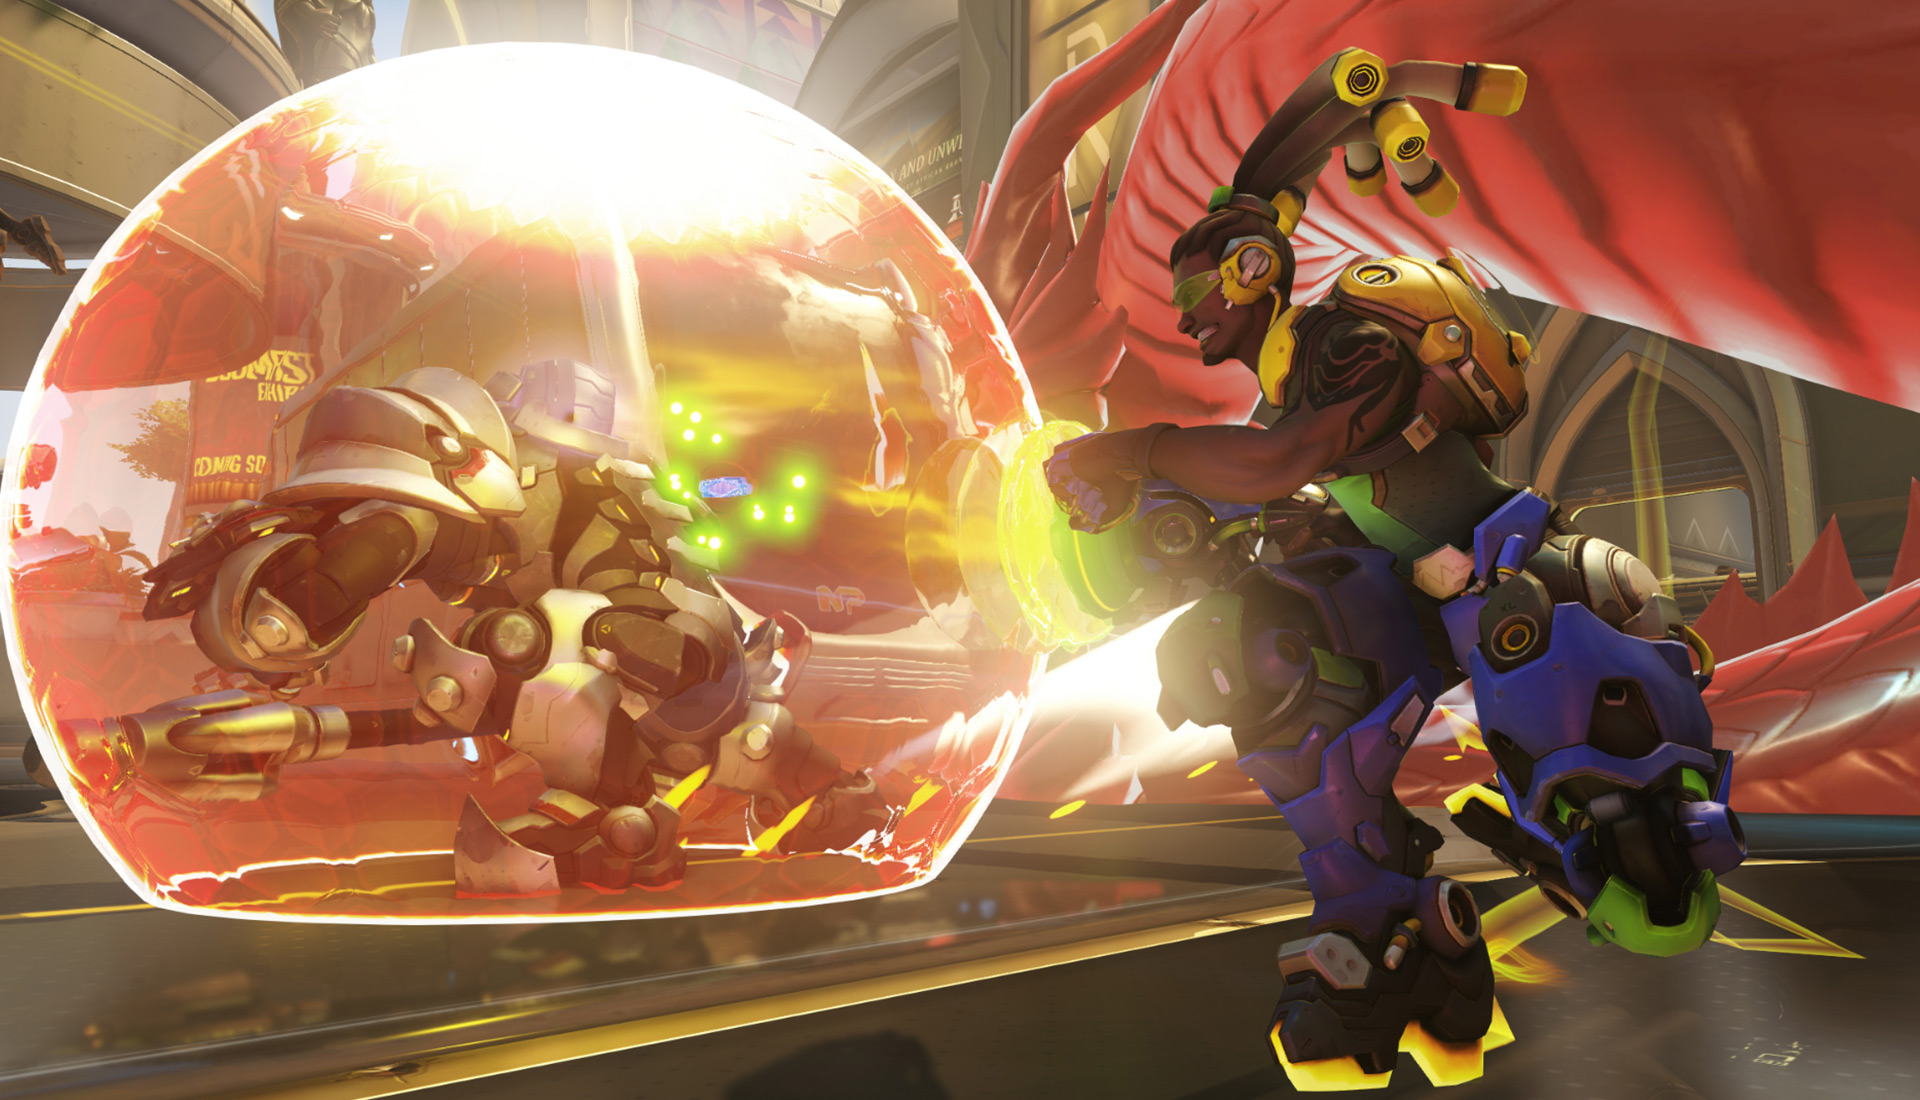 Overwatch’s Most Famous Lucio Player Would Rather Have Fun Than Go Pro